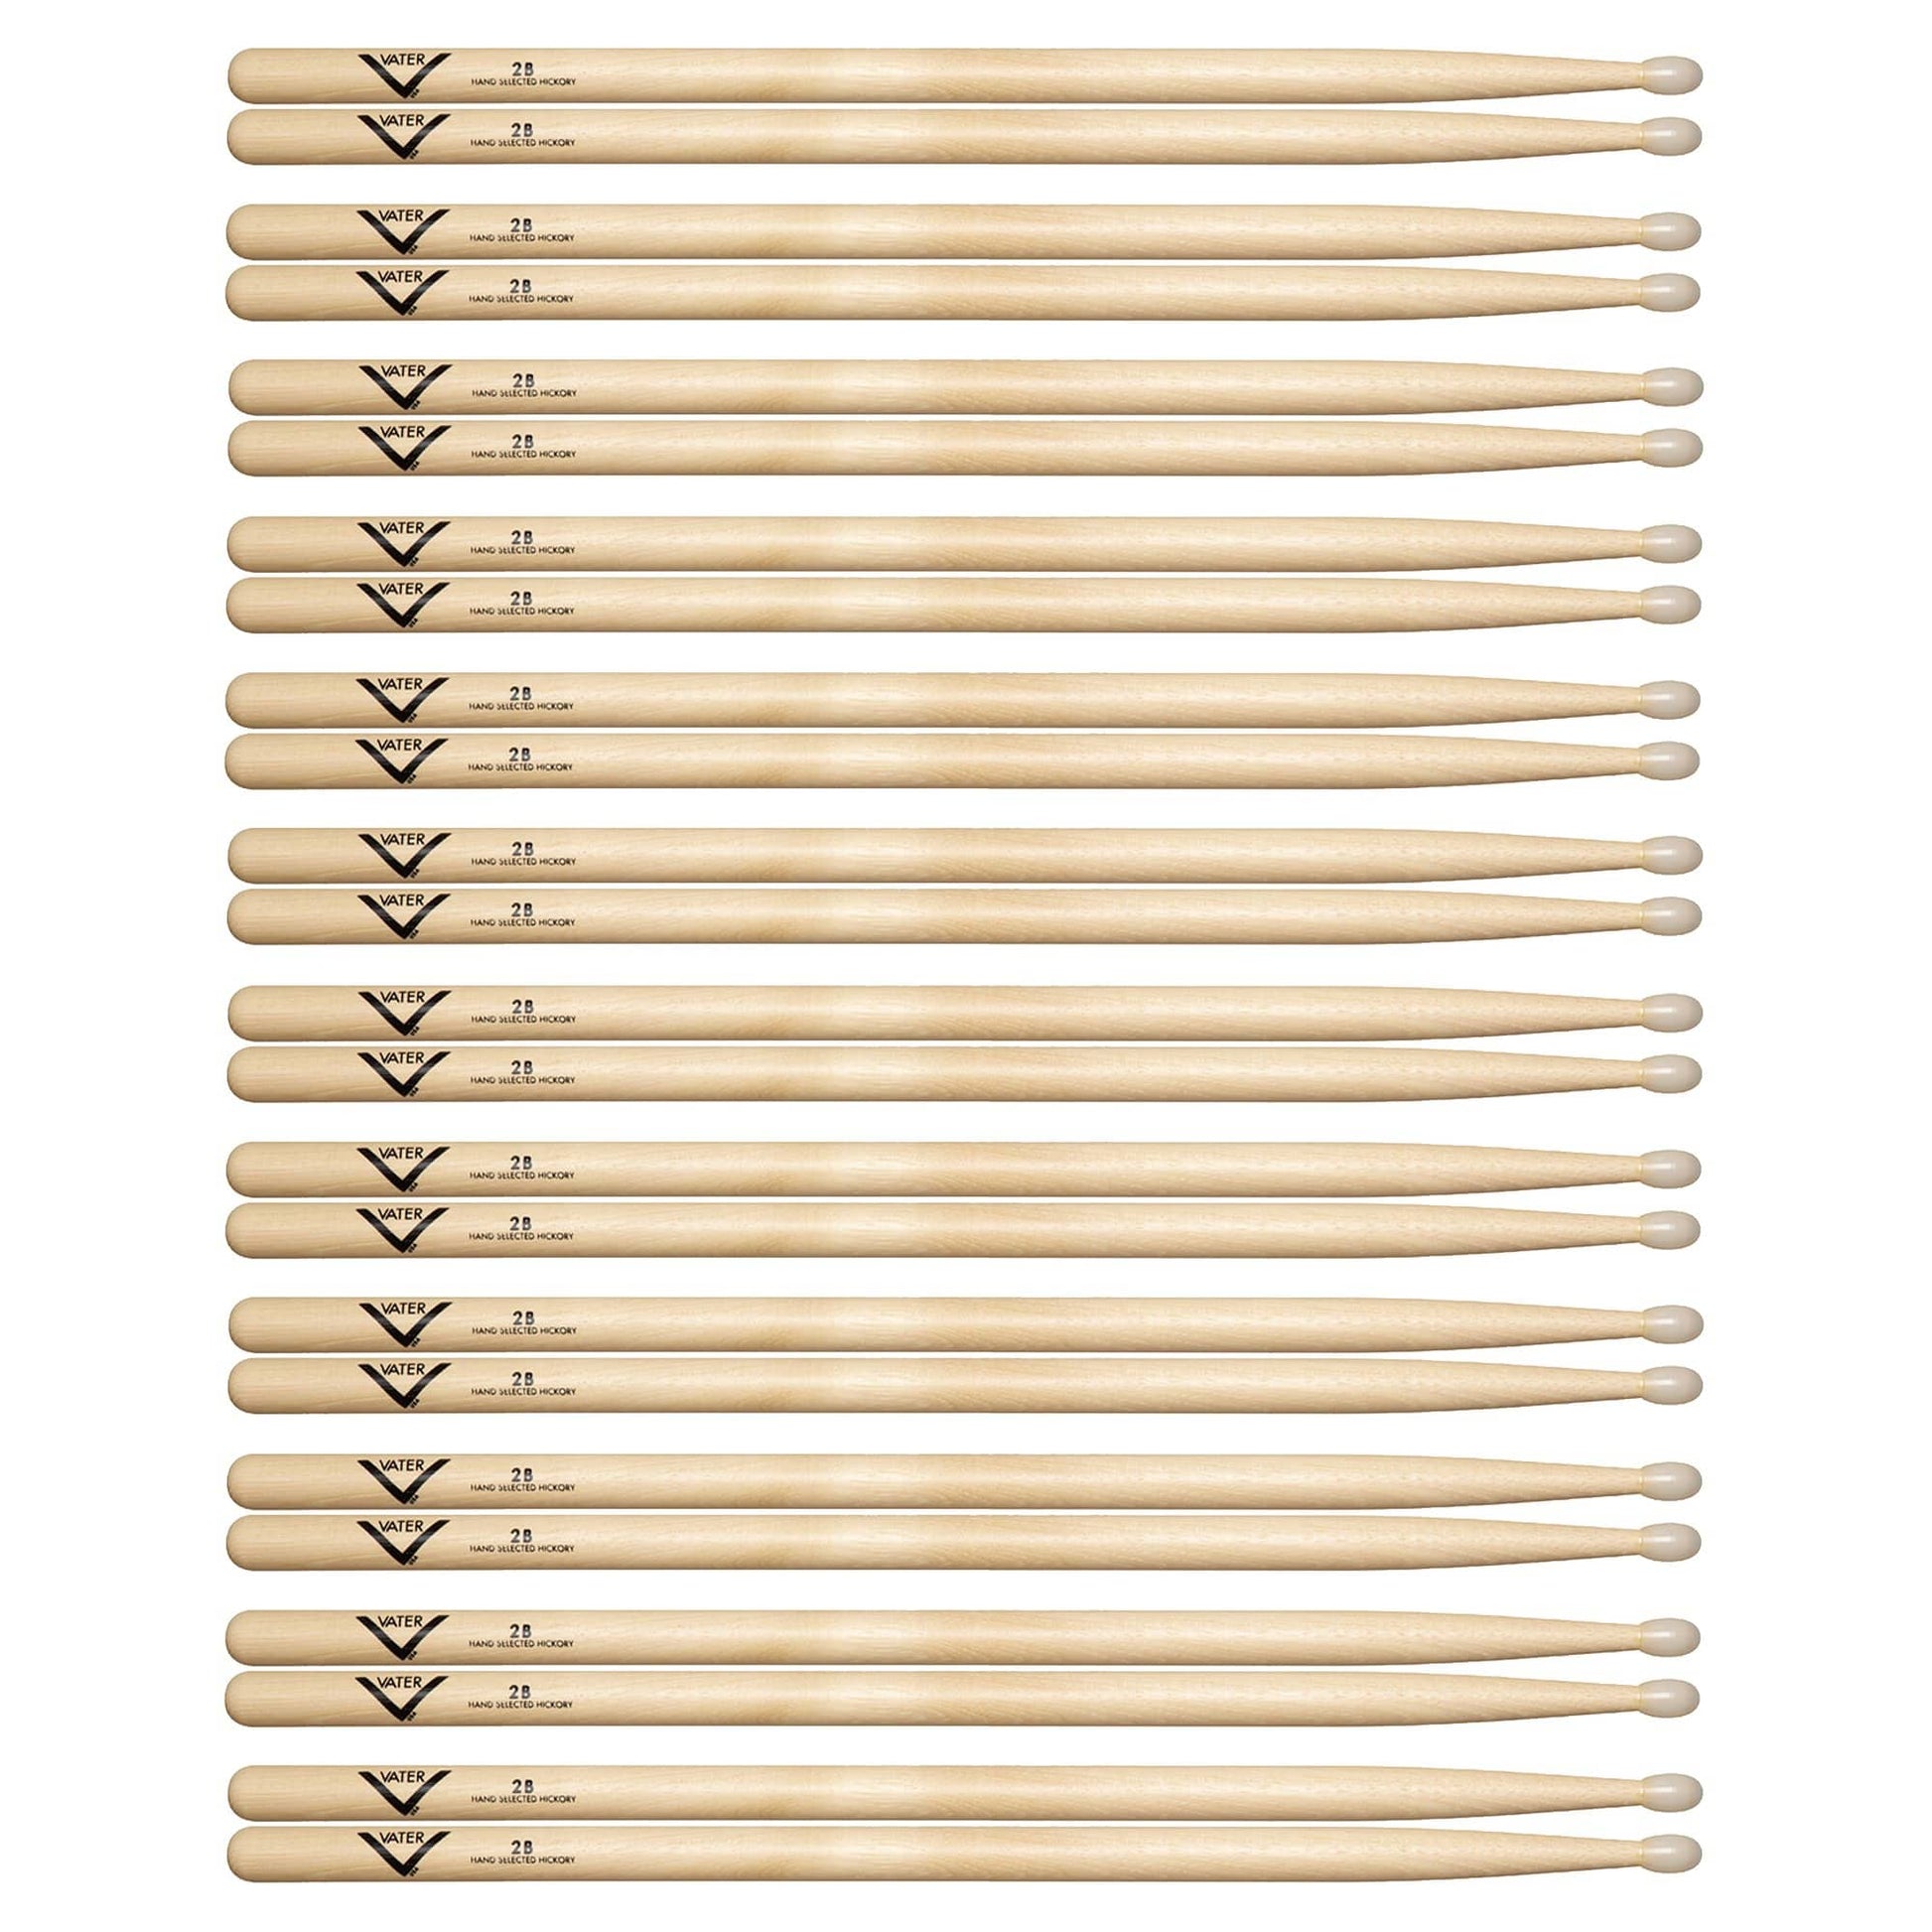 Vater Hickory 2B Nylon Tip Drum Sticks (12 Pair Bundle) Drums and Percussion / Parts and Accessories / Drum Sticks and Mallets